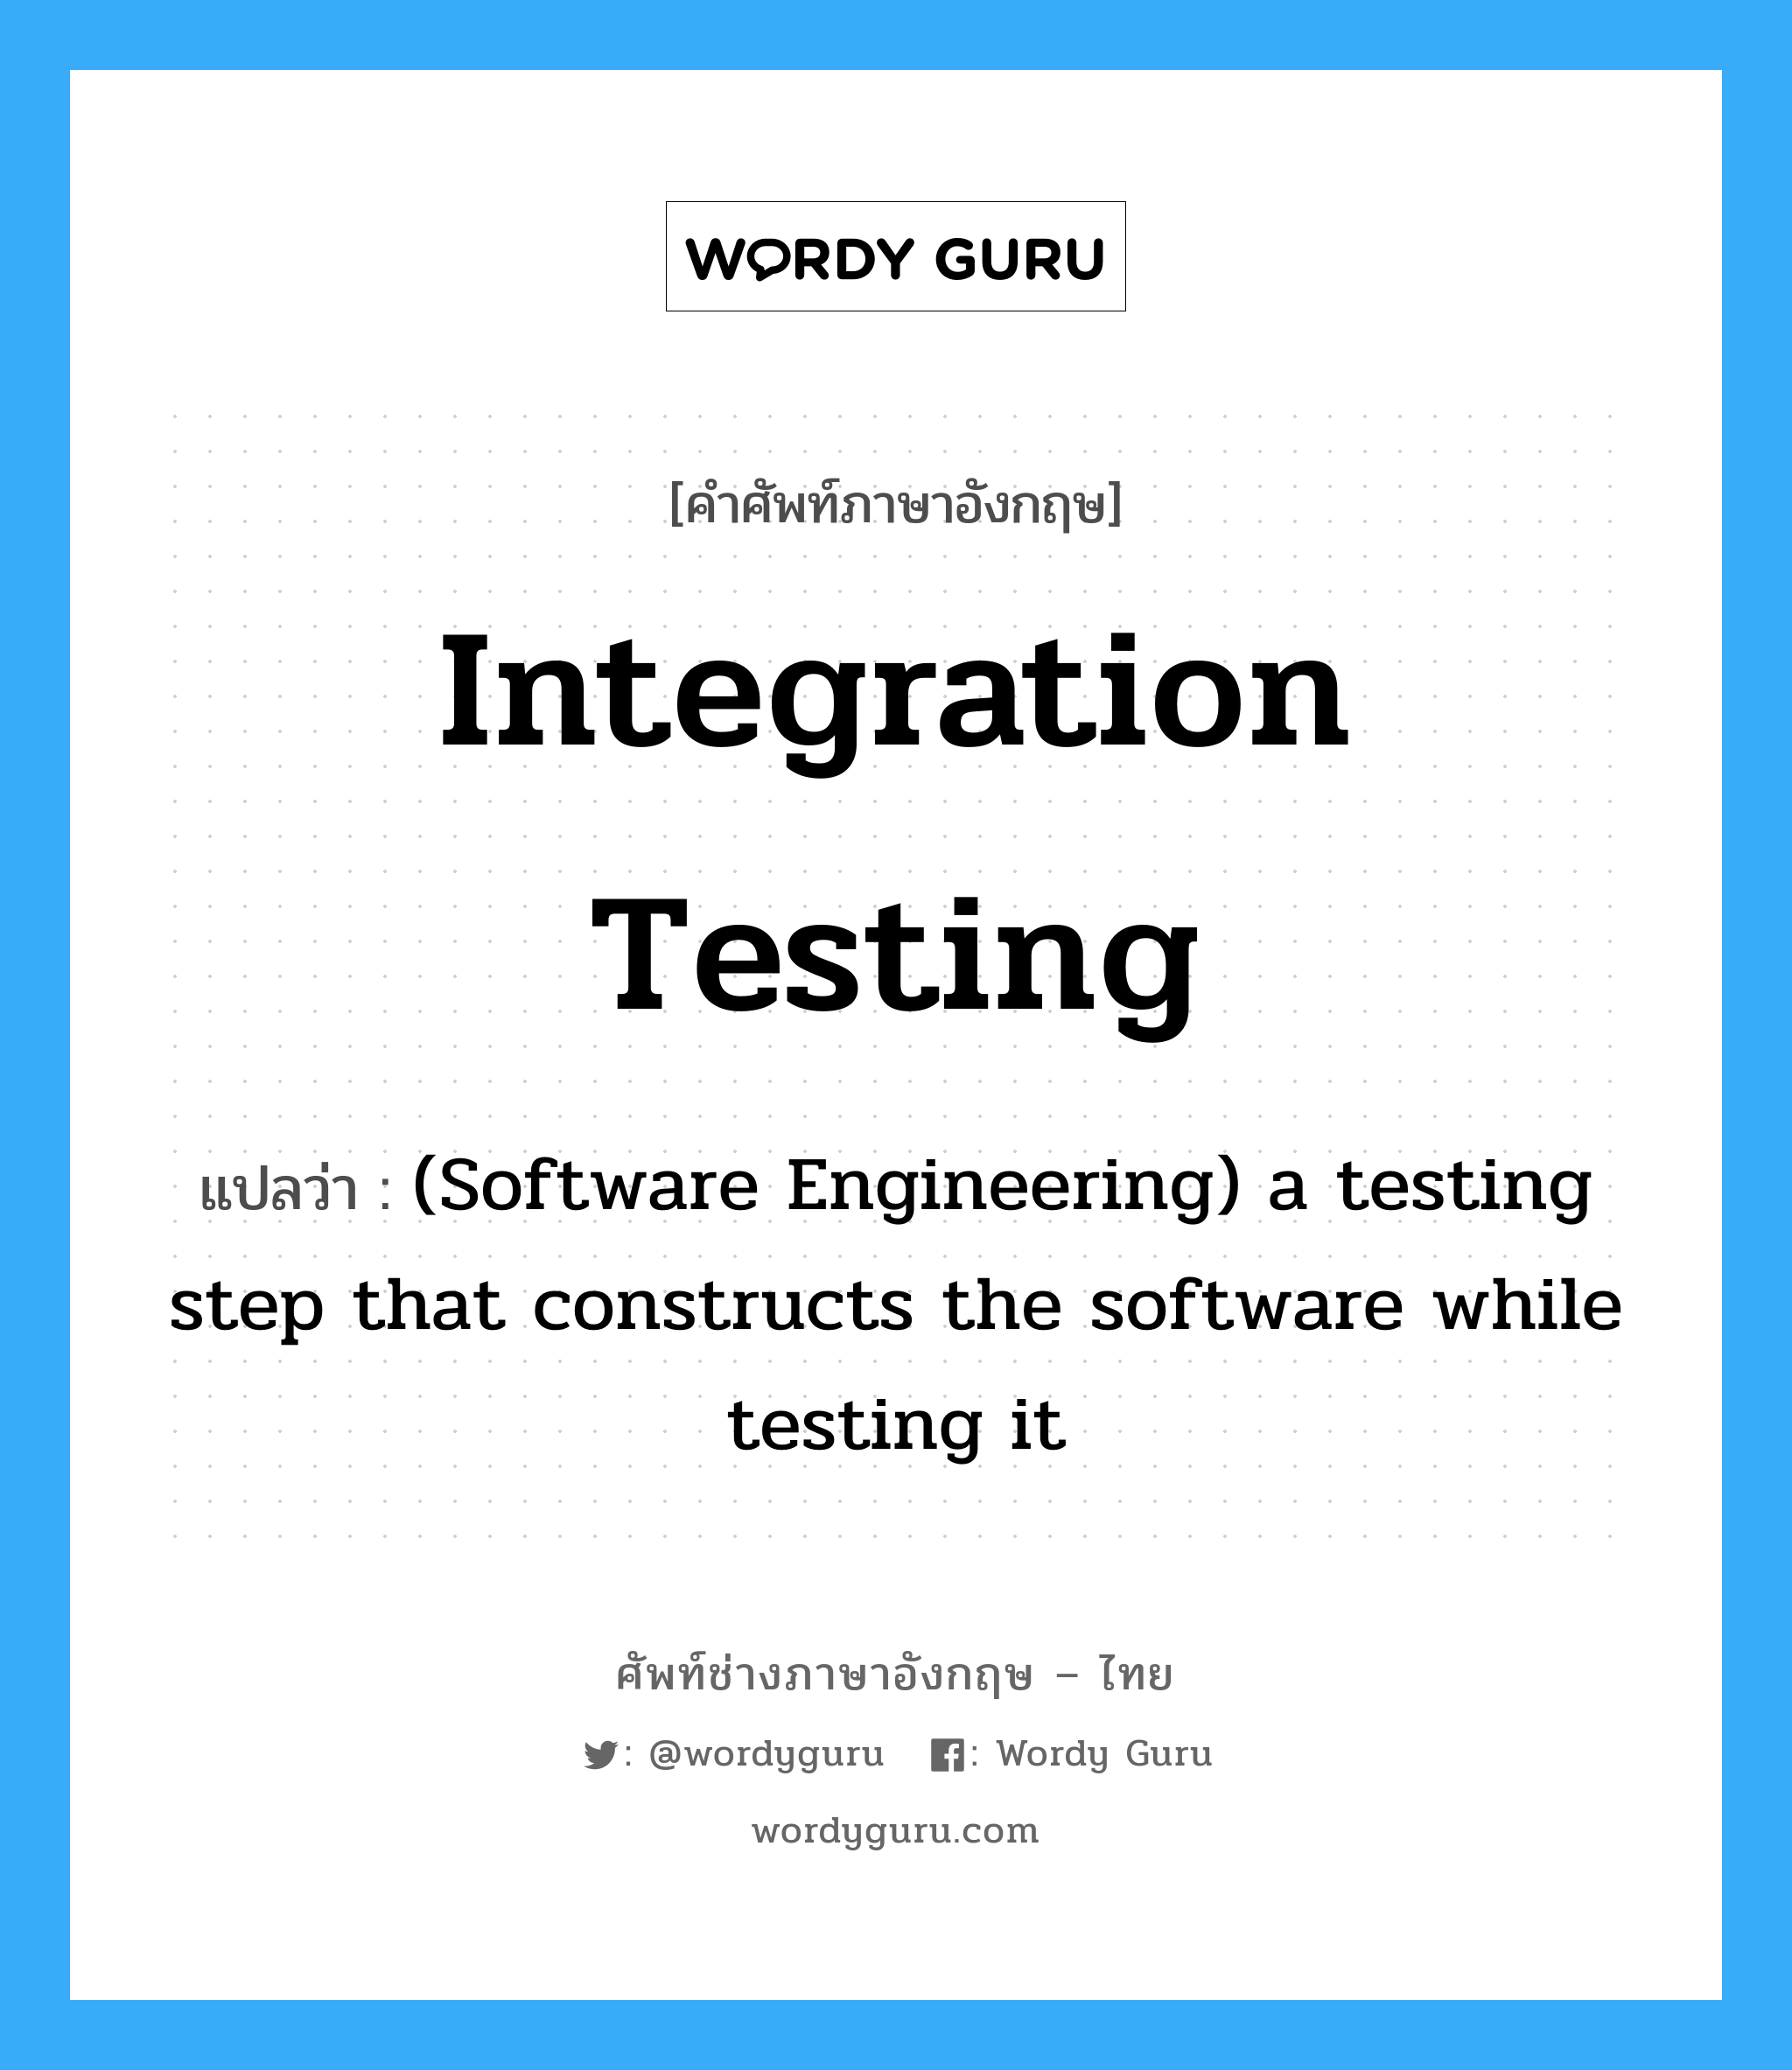 Integration testing แปลว่า?, คำศัพท์ช่างภาษาอังกฤษ - ไทย Integration testing คำศัพท์ภาษาอังกฤษ Integration testing แปลว่า (Software Engineering) a testing step that constructs the software while testing it